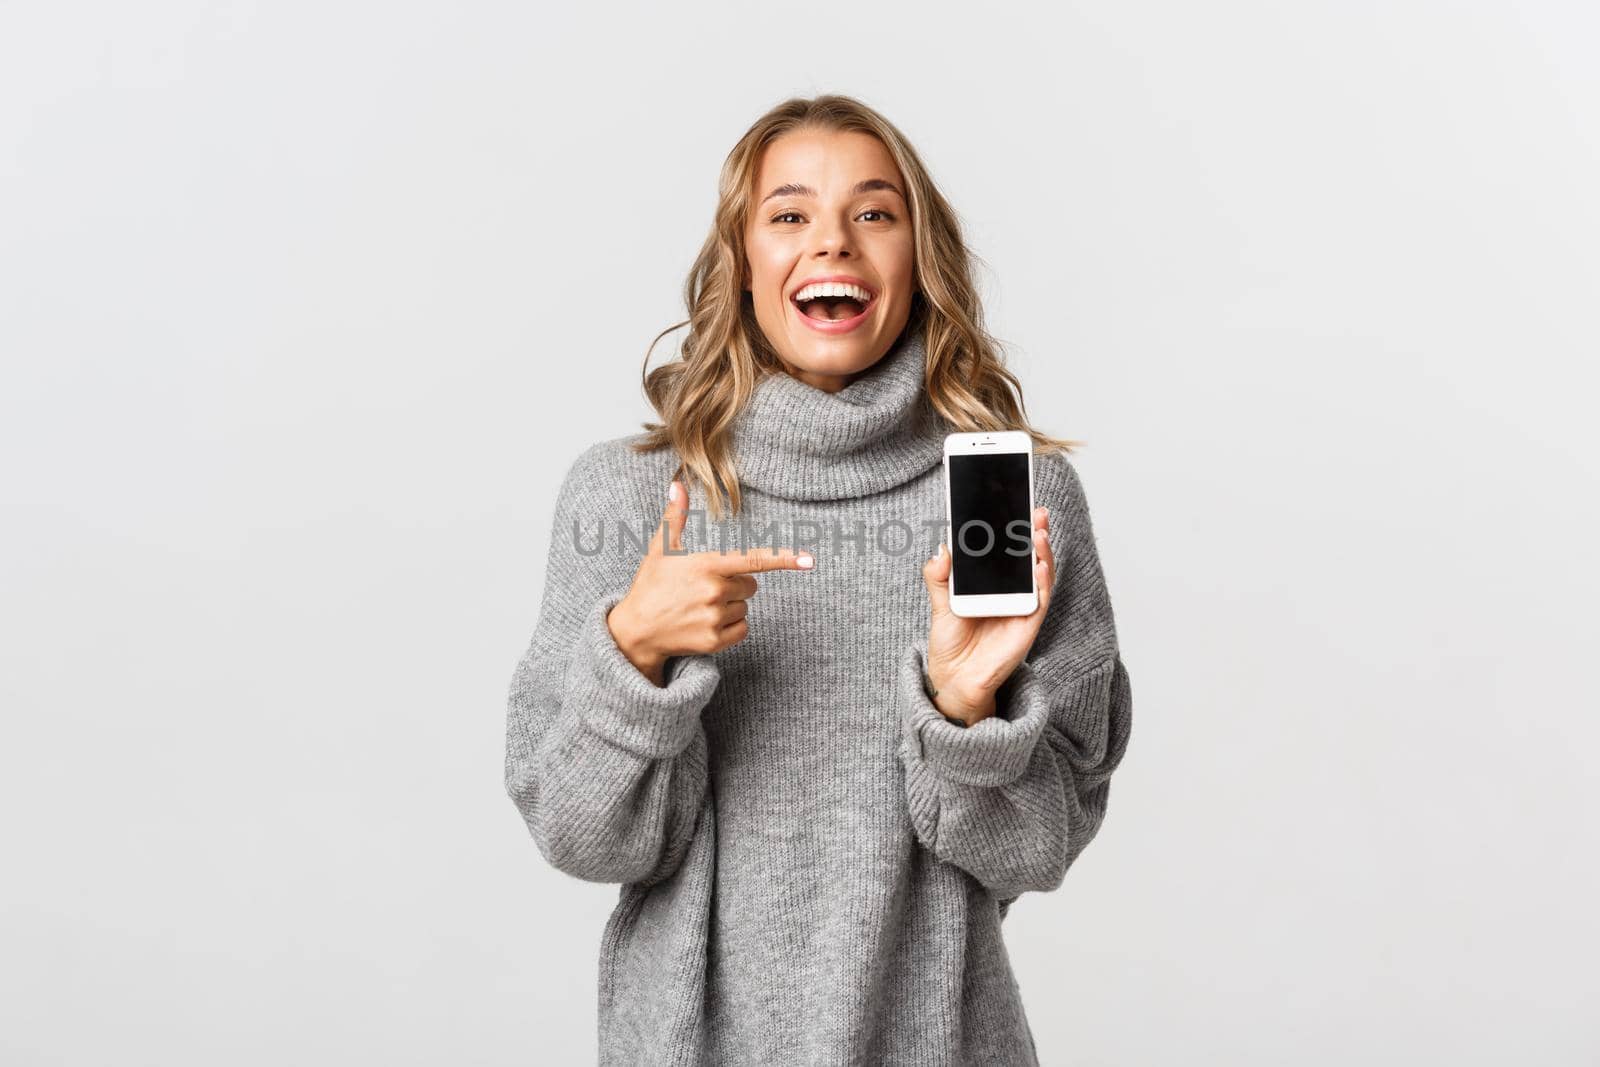 Portrait of happy attractive caucasian girl in grey sweater, laughing at something funny, pointing finger at smartphone screen, standing over white background.